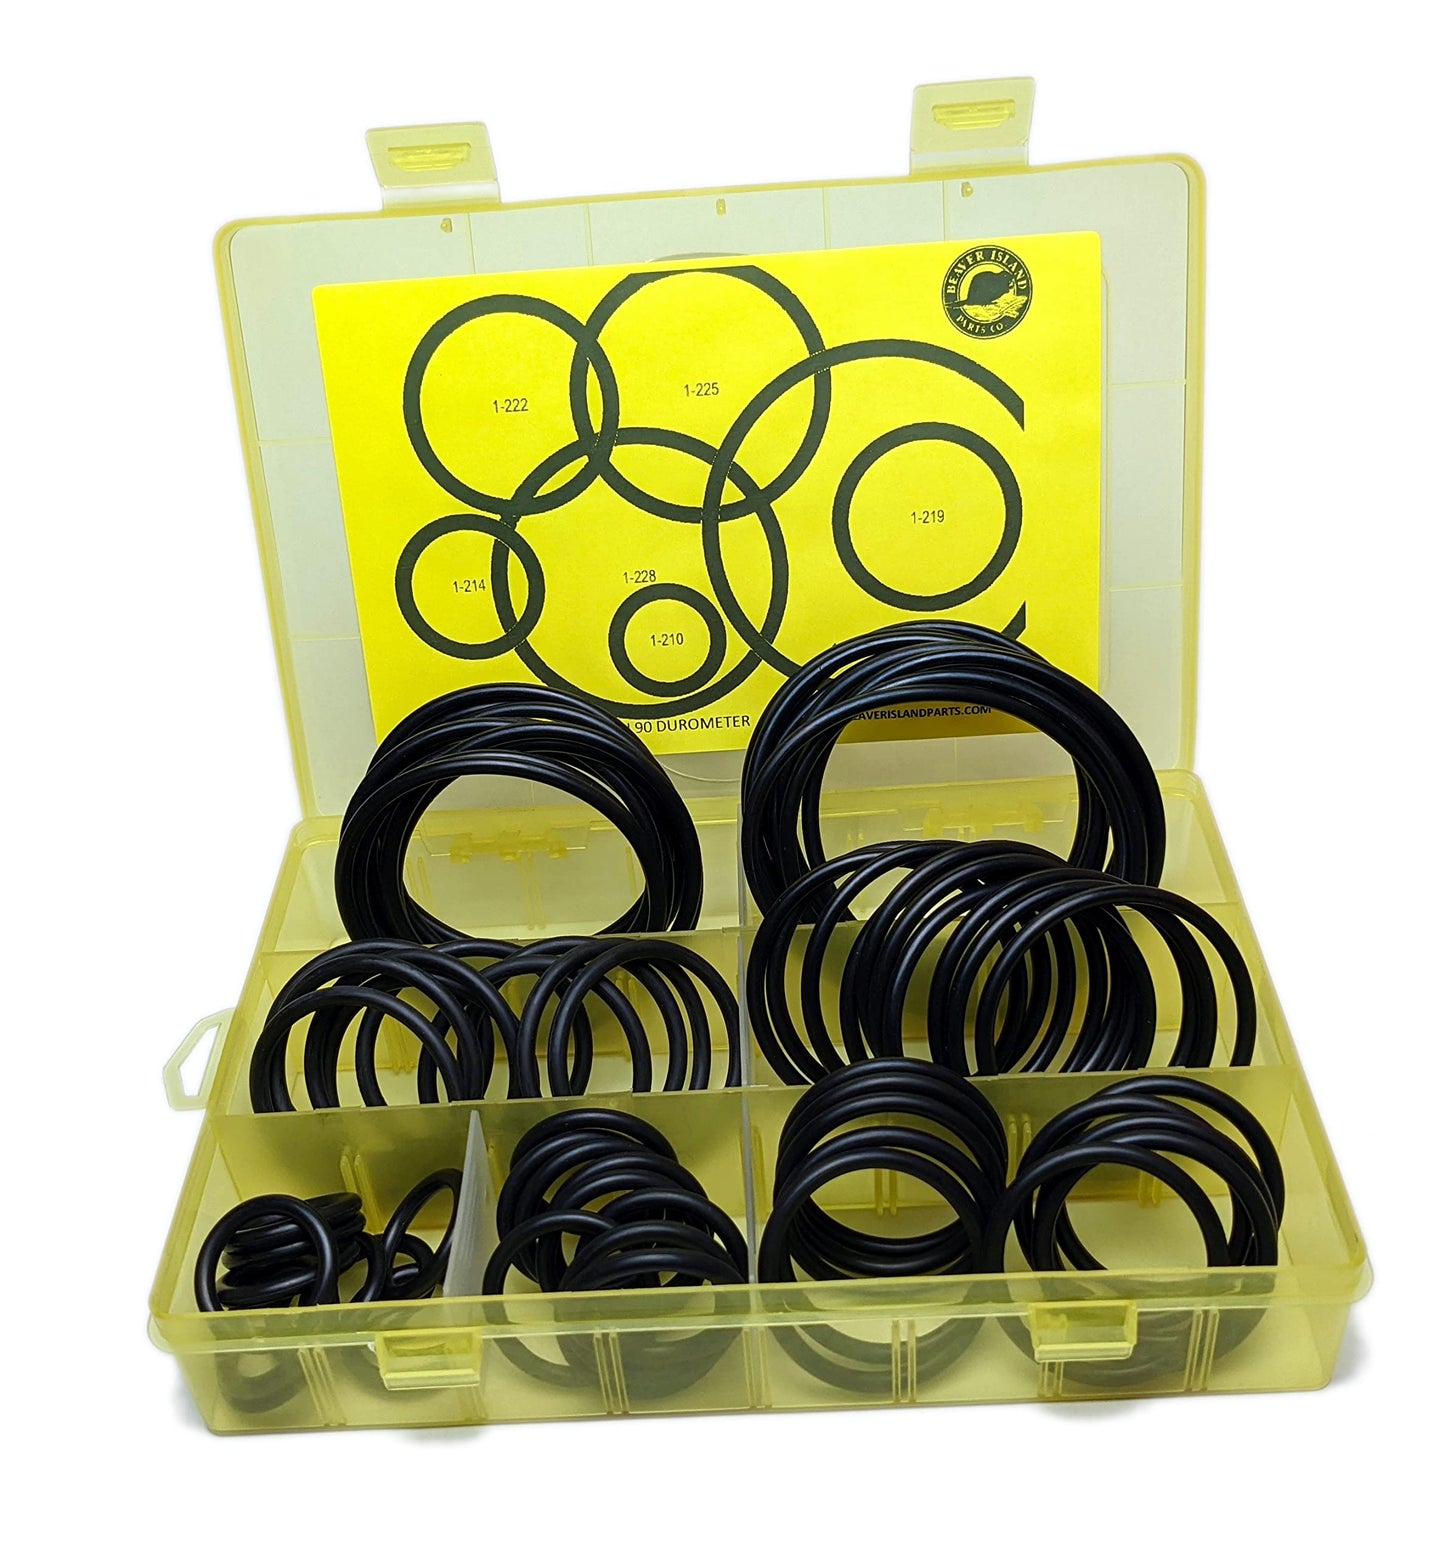 Hydraulic O-Ring Kit Flange Fittings 70 Pieces (7 Common Sizes) SAE Buna-N 90 Durometer SAE Code 61 & 62